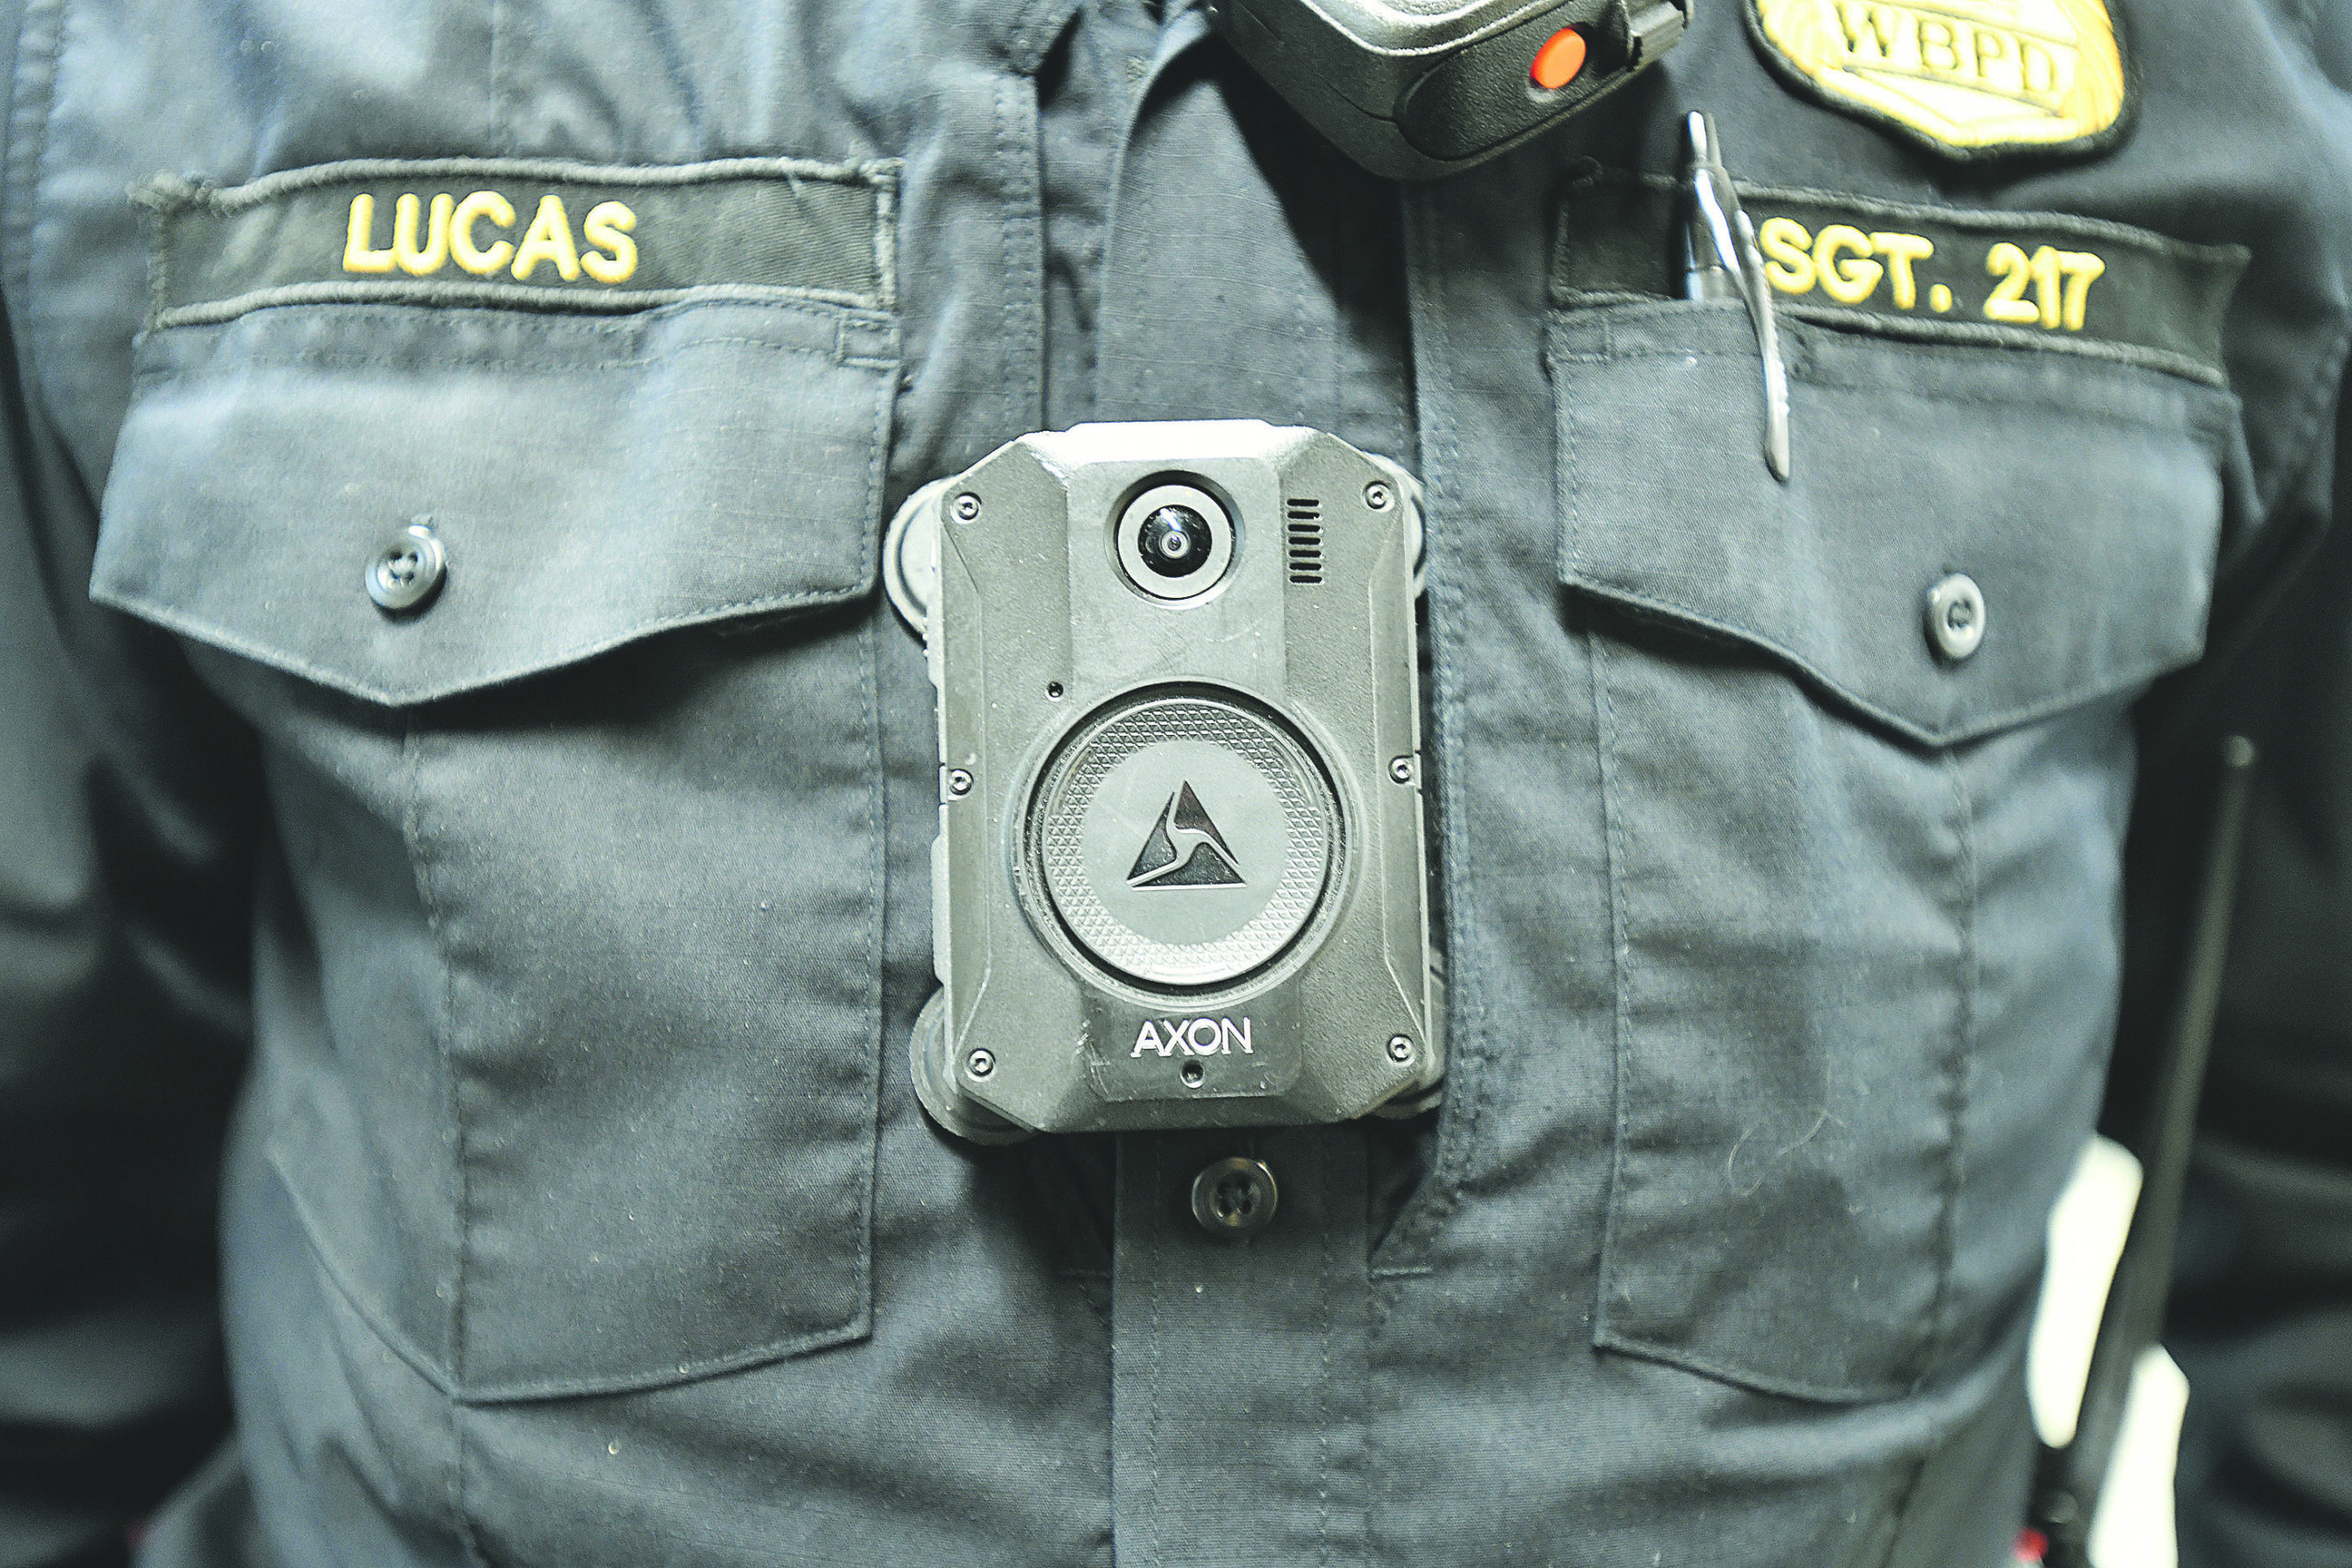 Police in the Village of Westhampton Beach have been using bodycams since 2016.